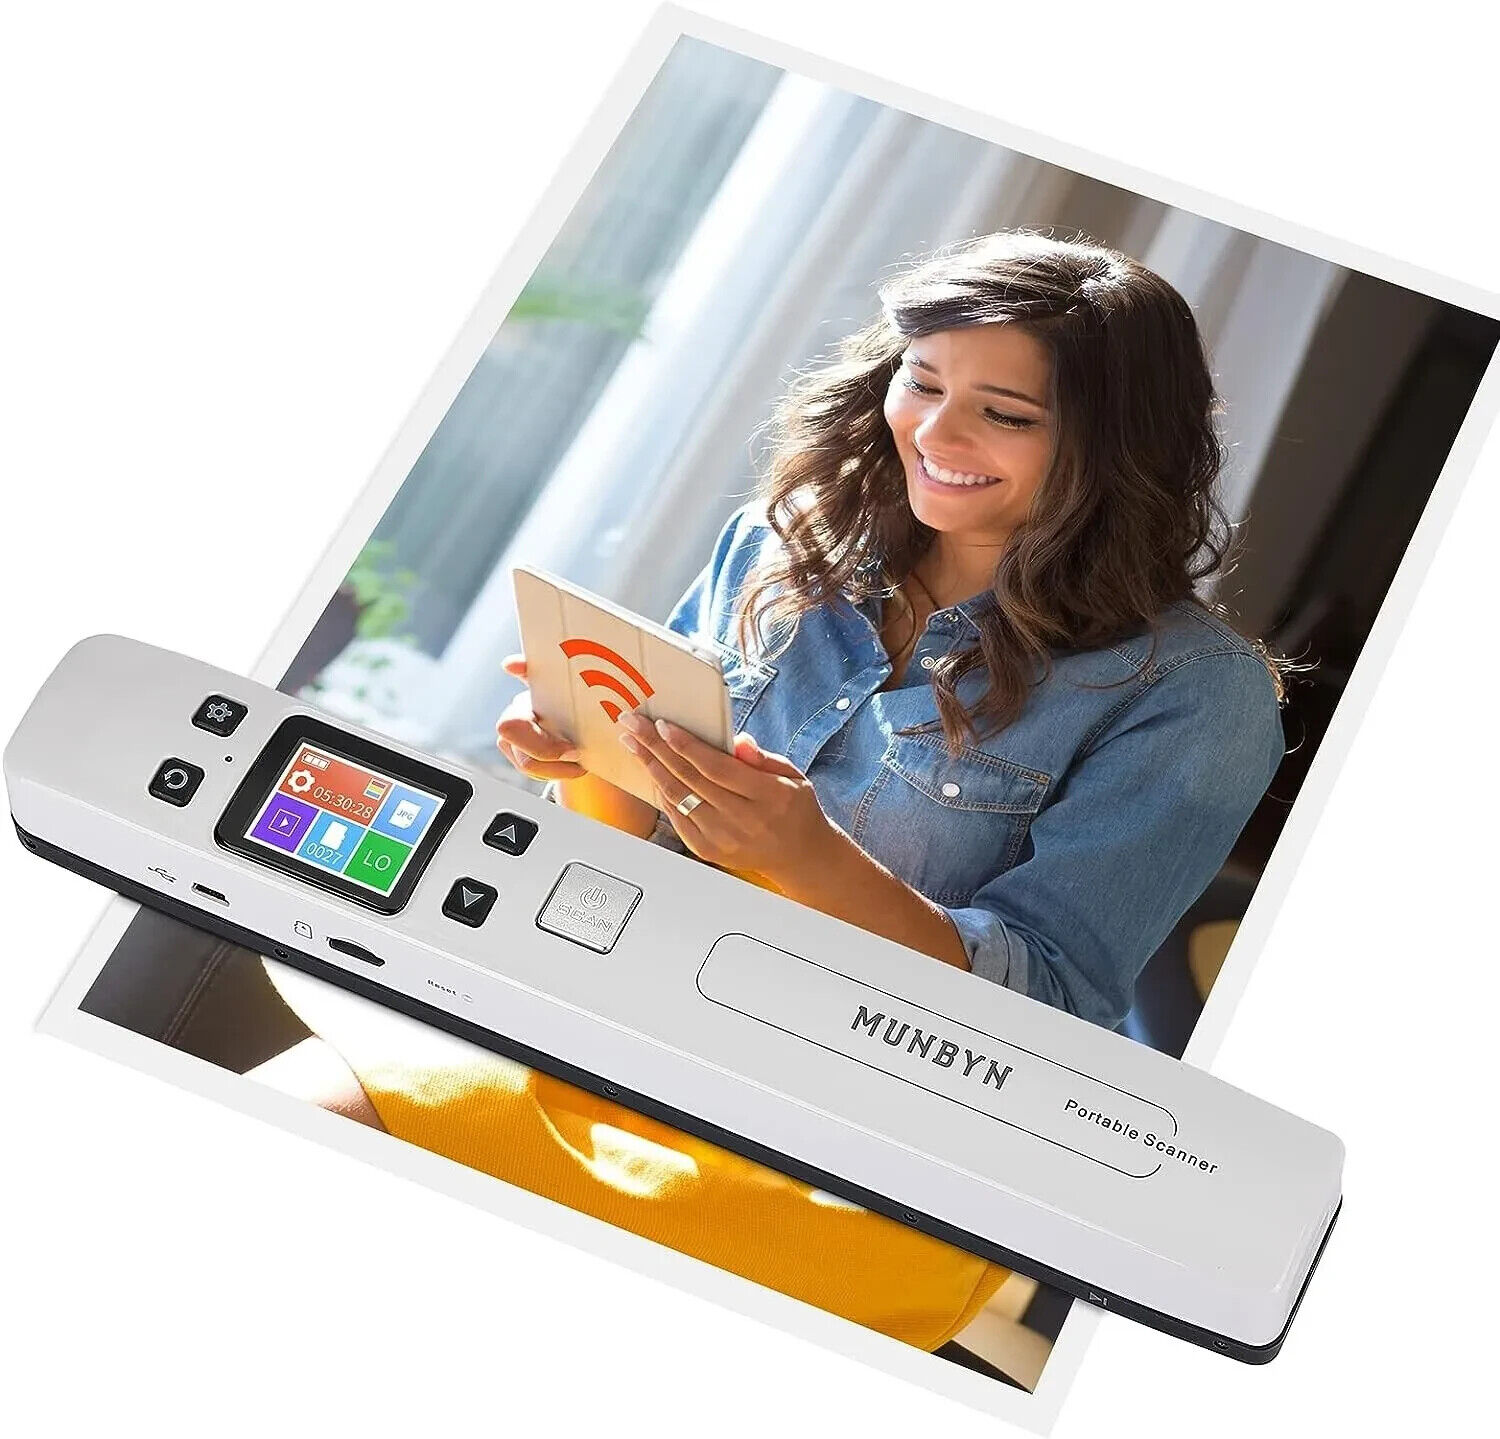 NEW MUNBYN Portable Scanner Photo Scanner for Documents Pictures Texts 1050DPI